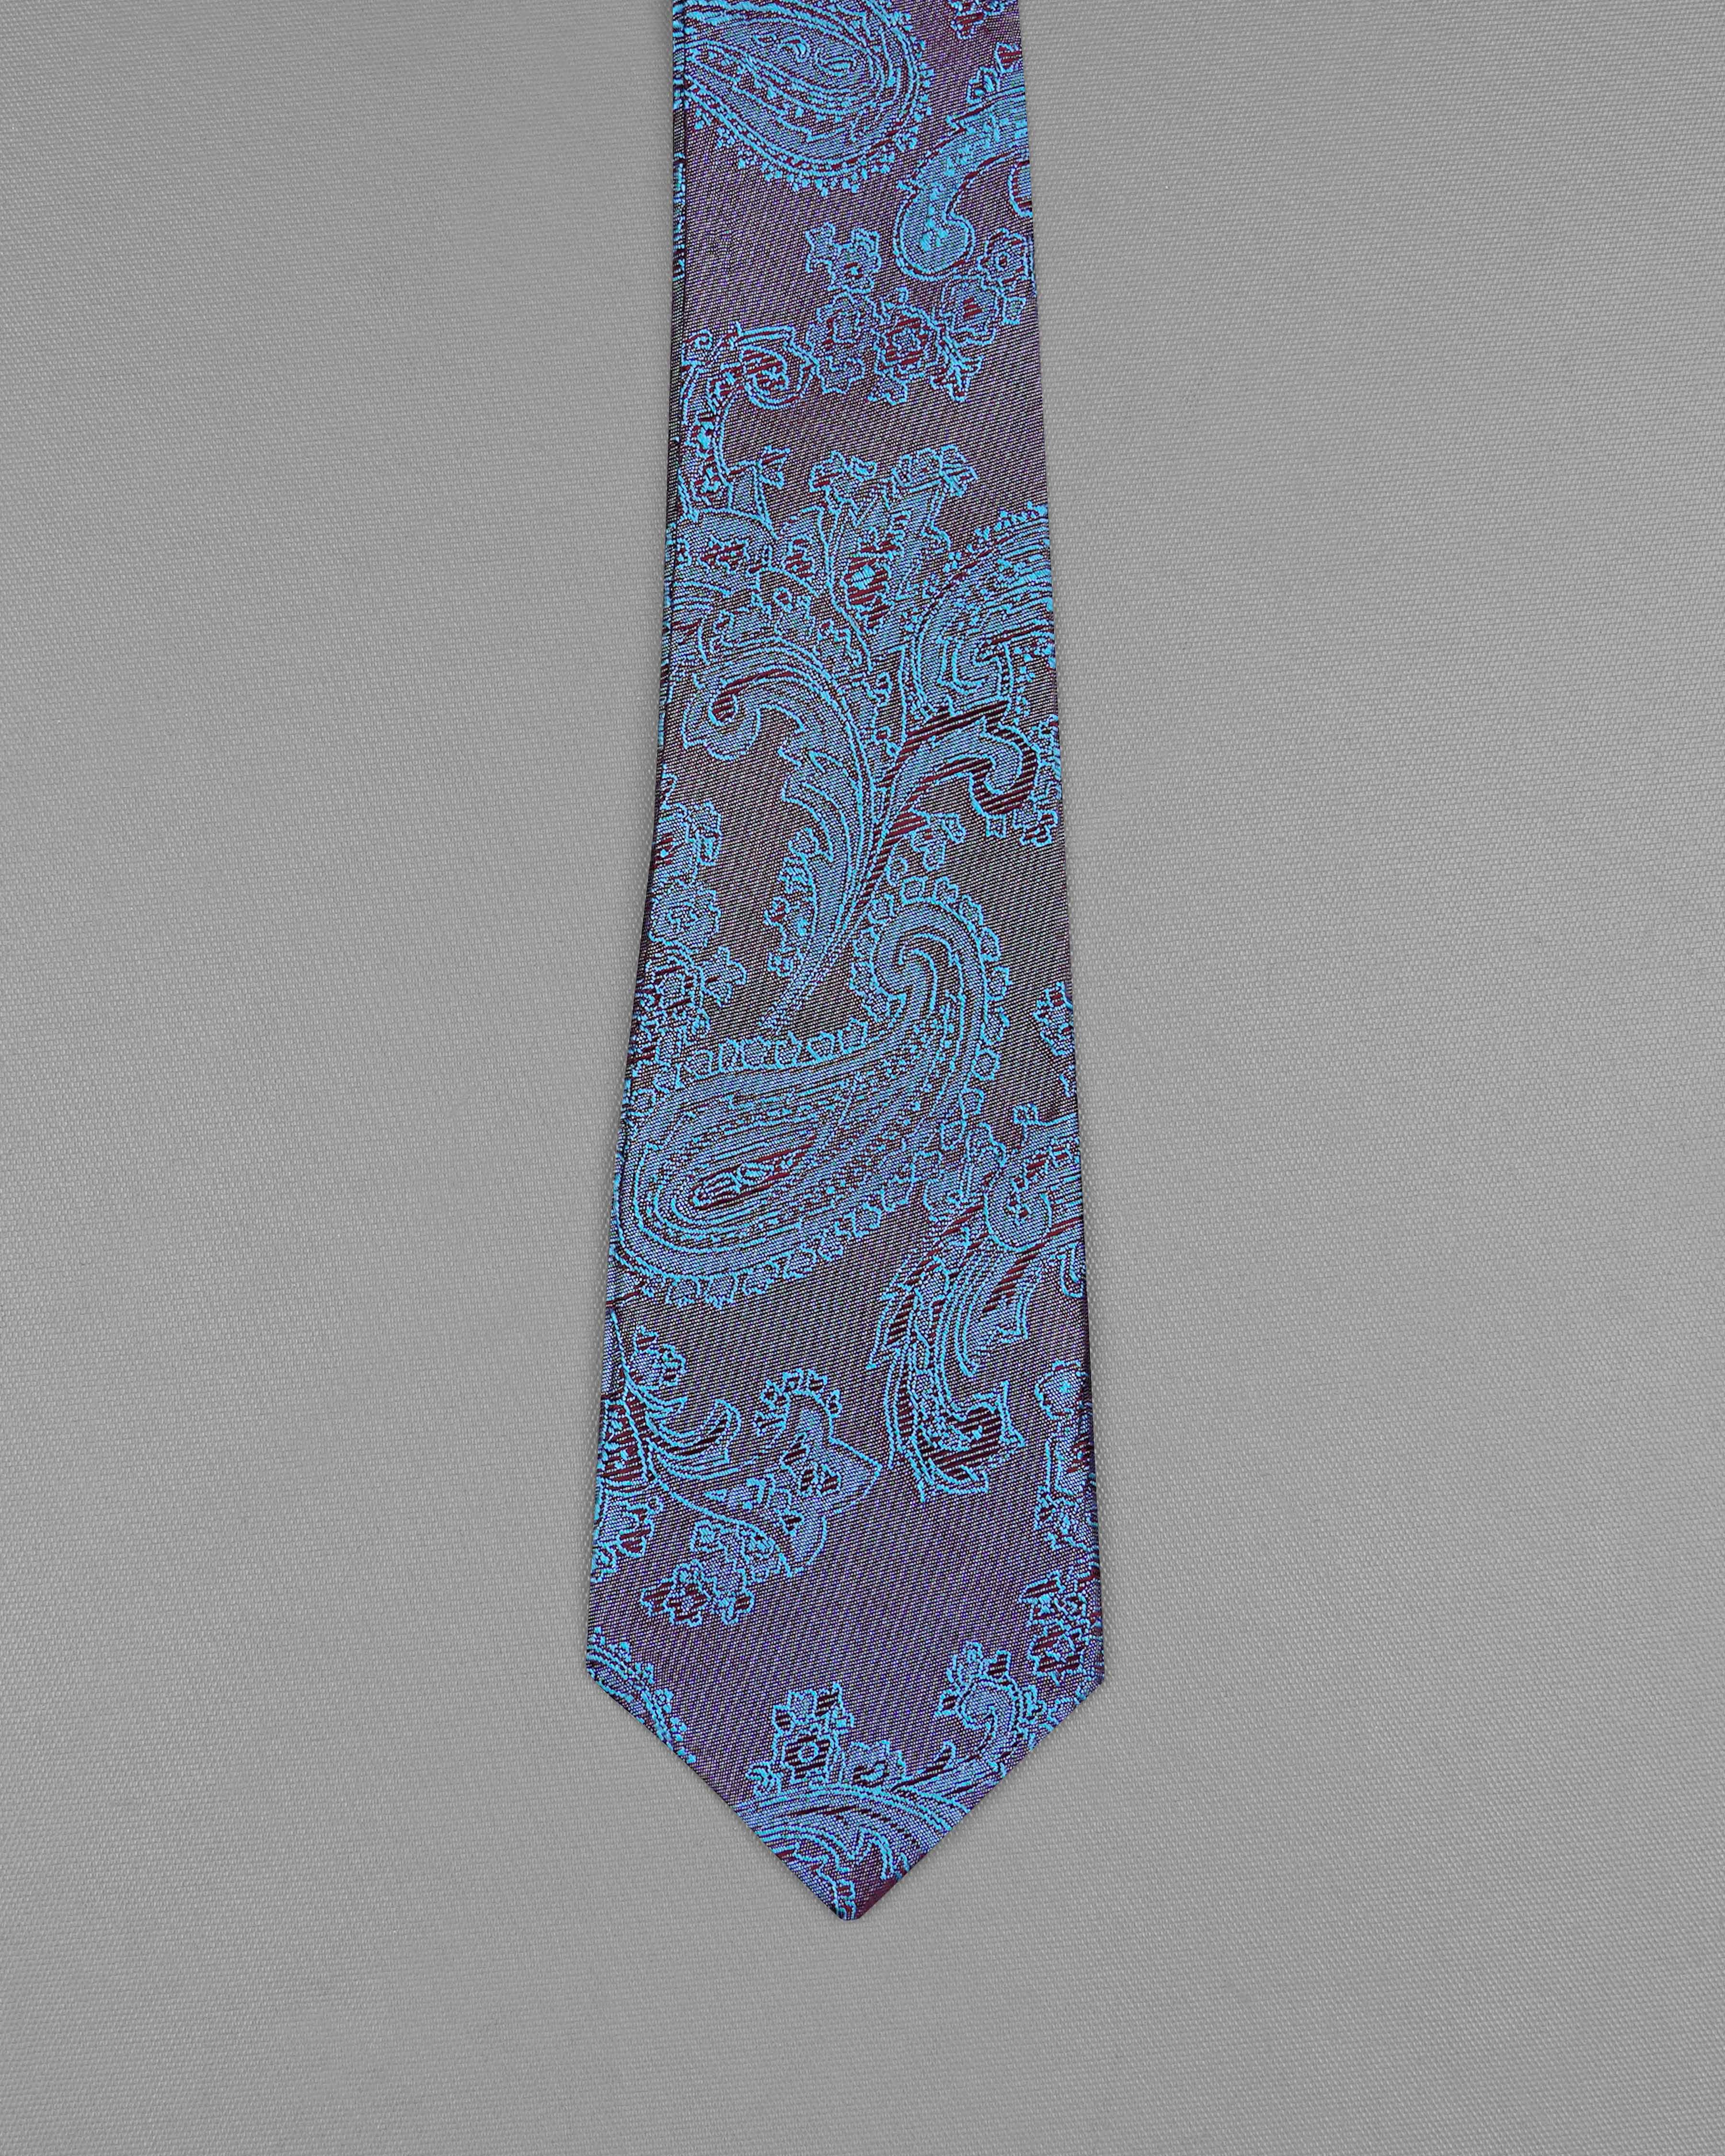 Purplish and Cosmic Maroon Two Tone Paisley Jacquard Tie with Pocket Square TP035